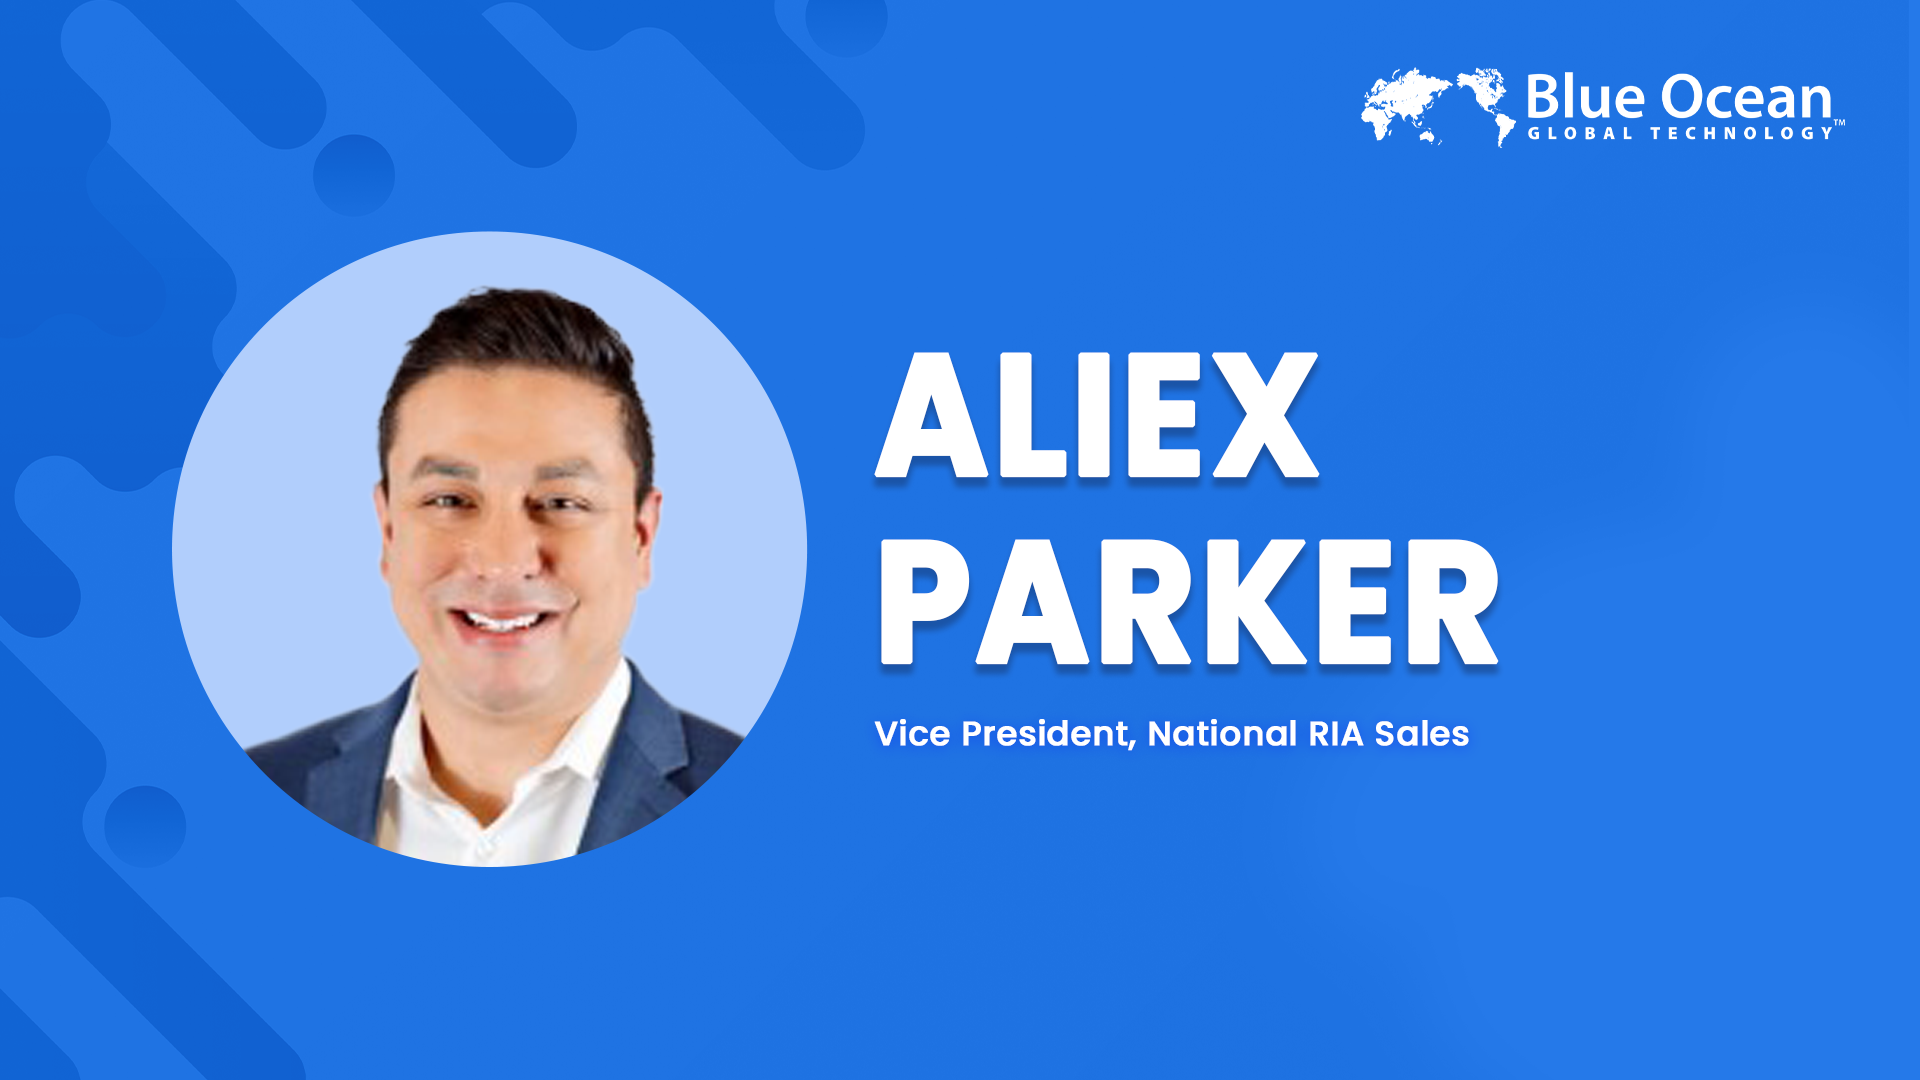 Blue Ocean Global Technology Interviews Aliex Parker | Vice President of National RIA Sales